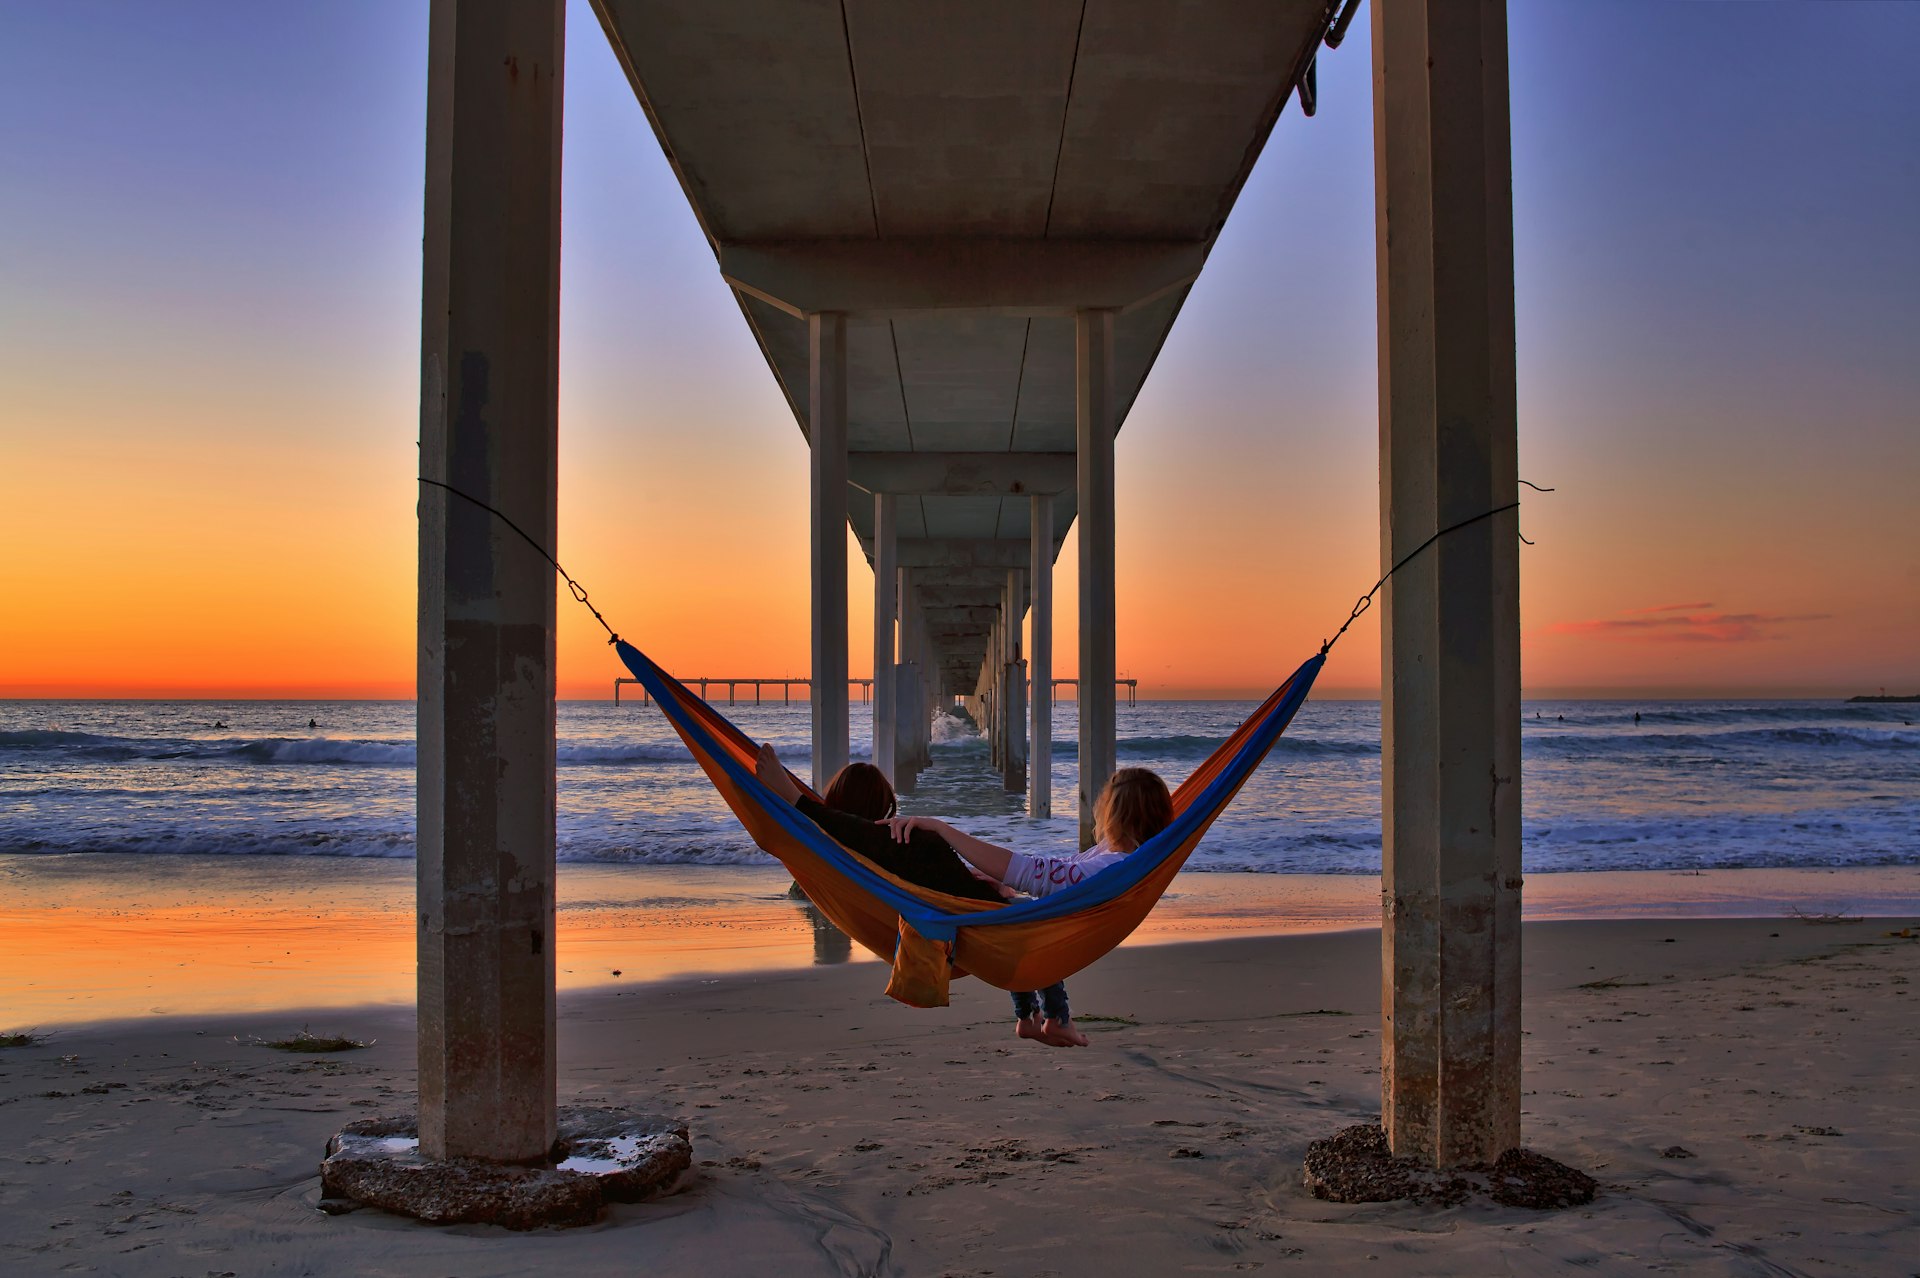 A couple relaxes in a hammock under the Ocean Beach Pier to enjoy a colorful winter sunset